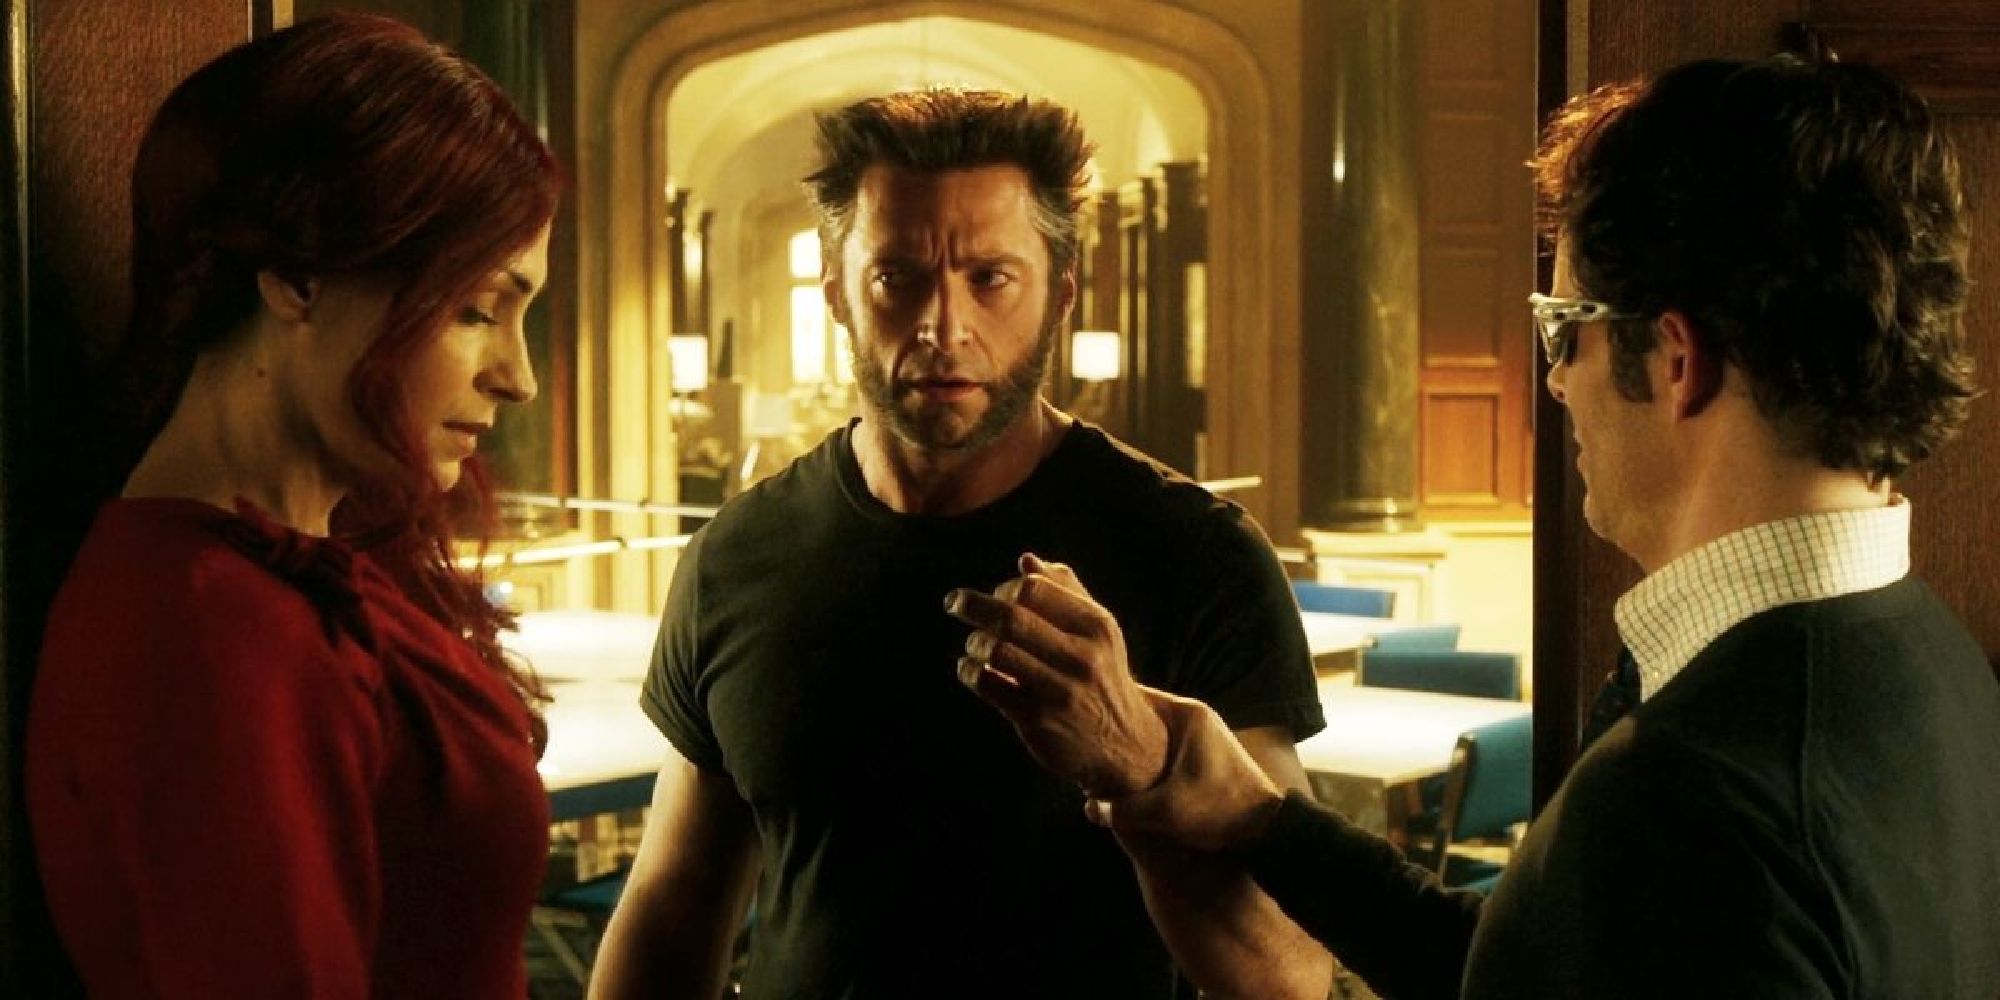 Scott stopping Logan from touching Jean in X-Men: Days Of Future Past.